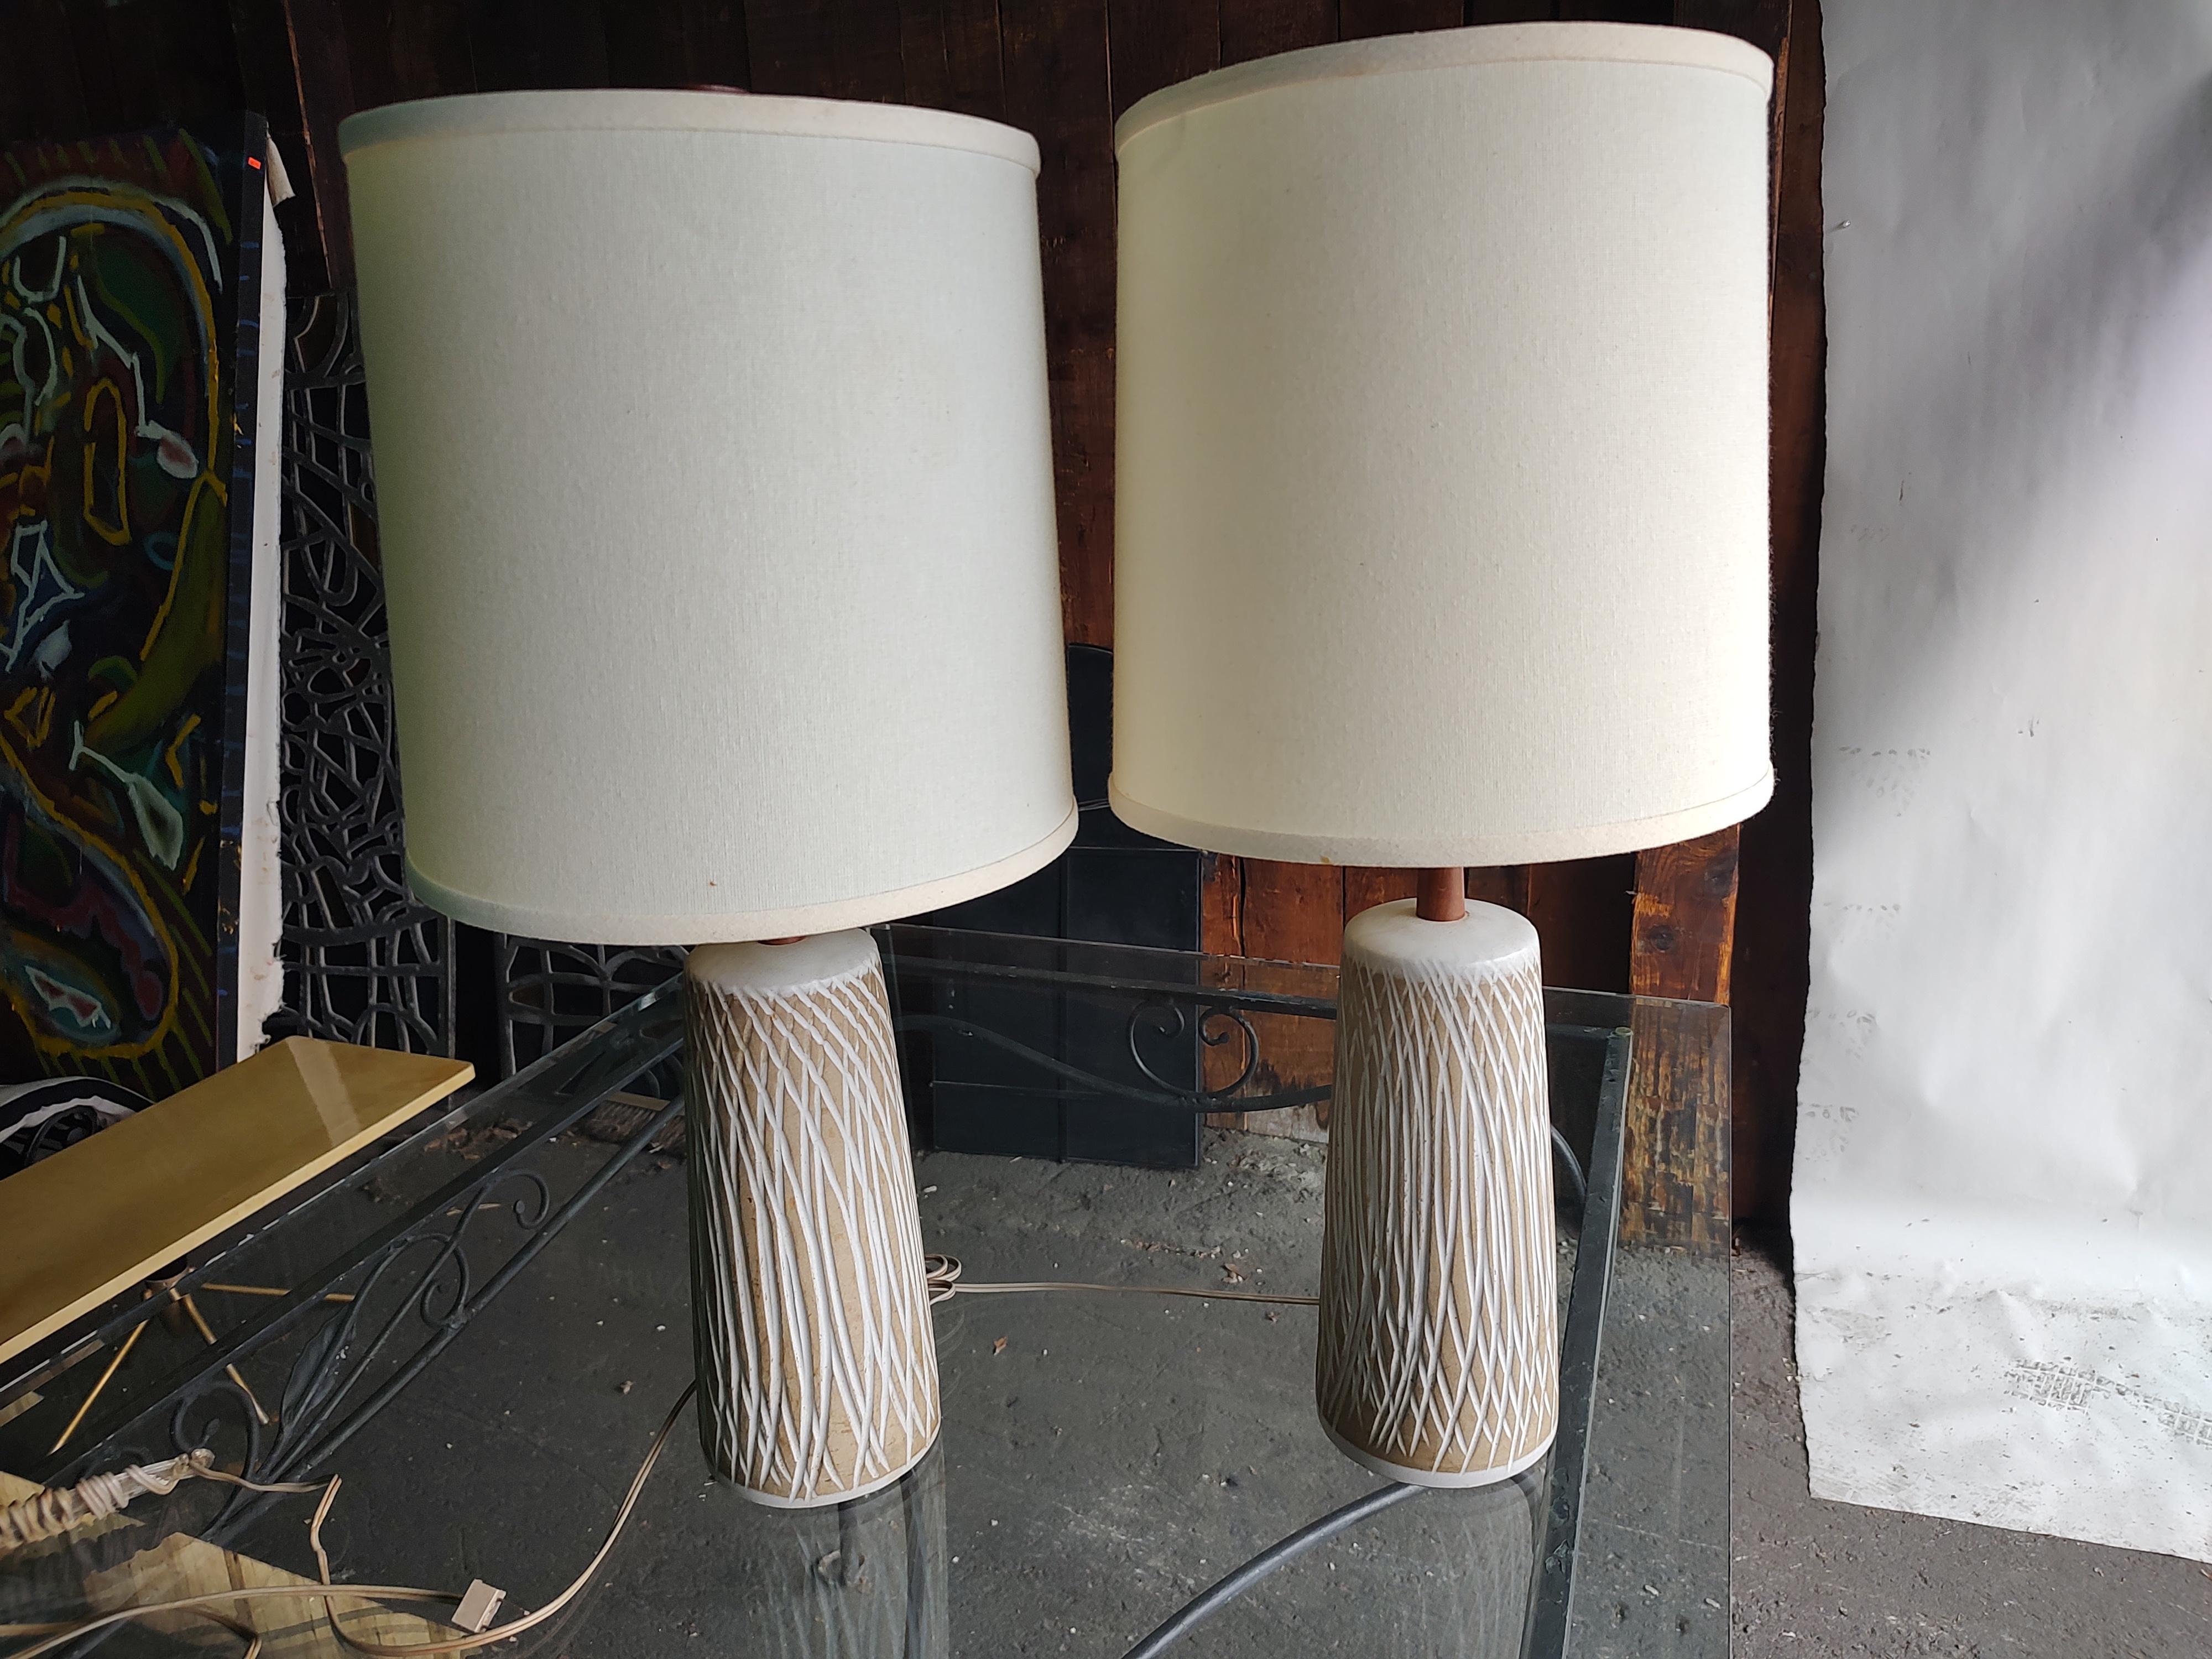 Pair Mid-Century Modern Table Lamps by Gordon & Jane Martz with Original Shades In Good Condition For Sale In Port Jervis, NY